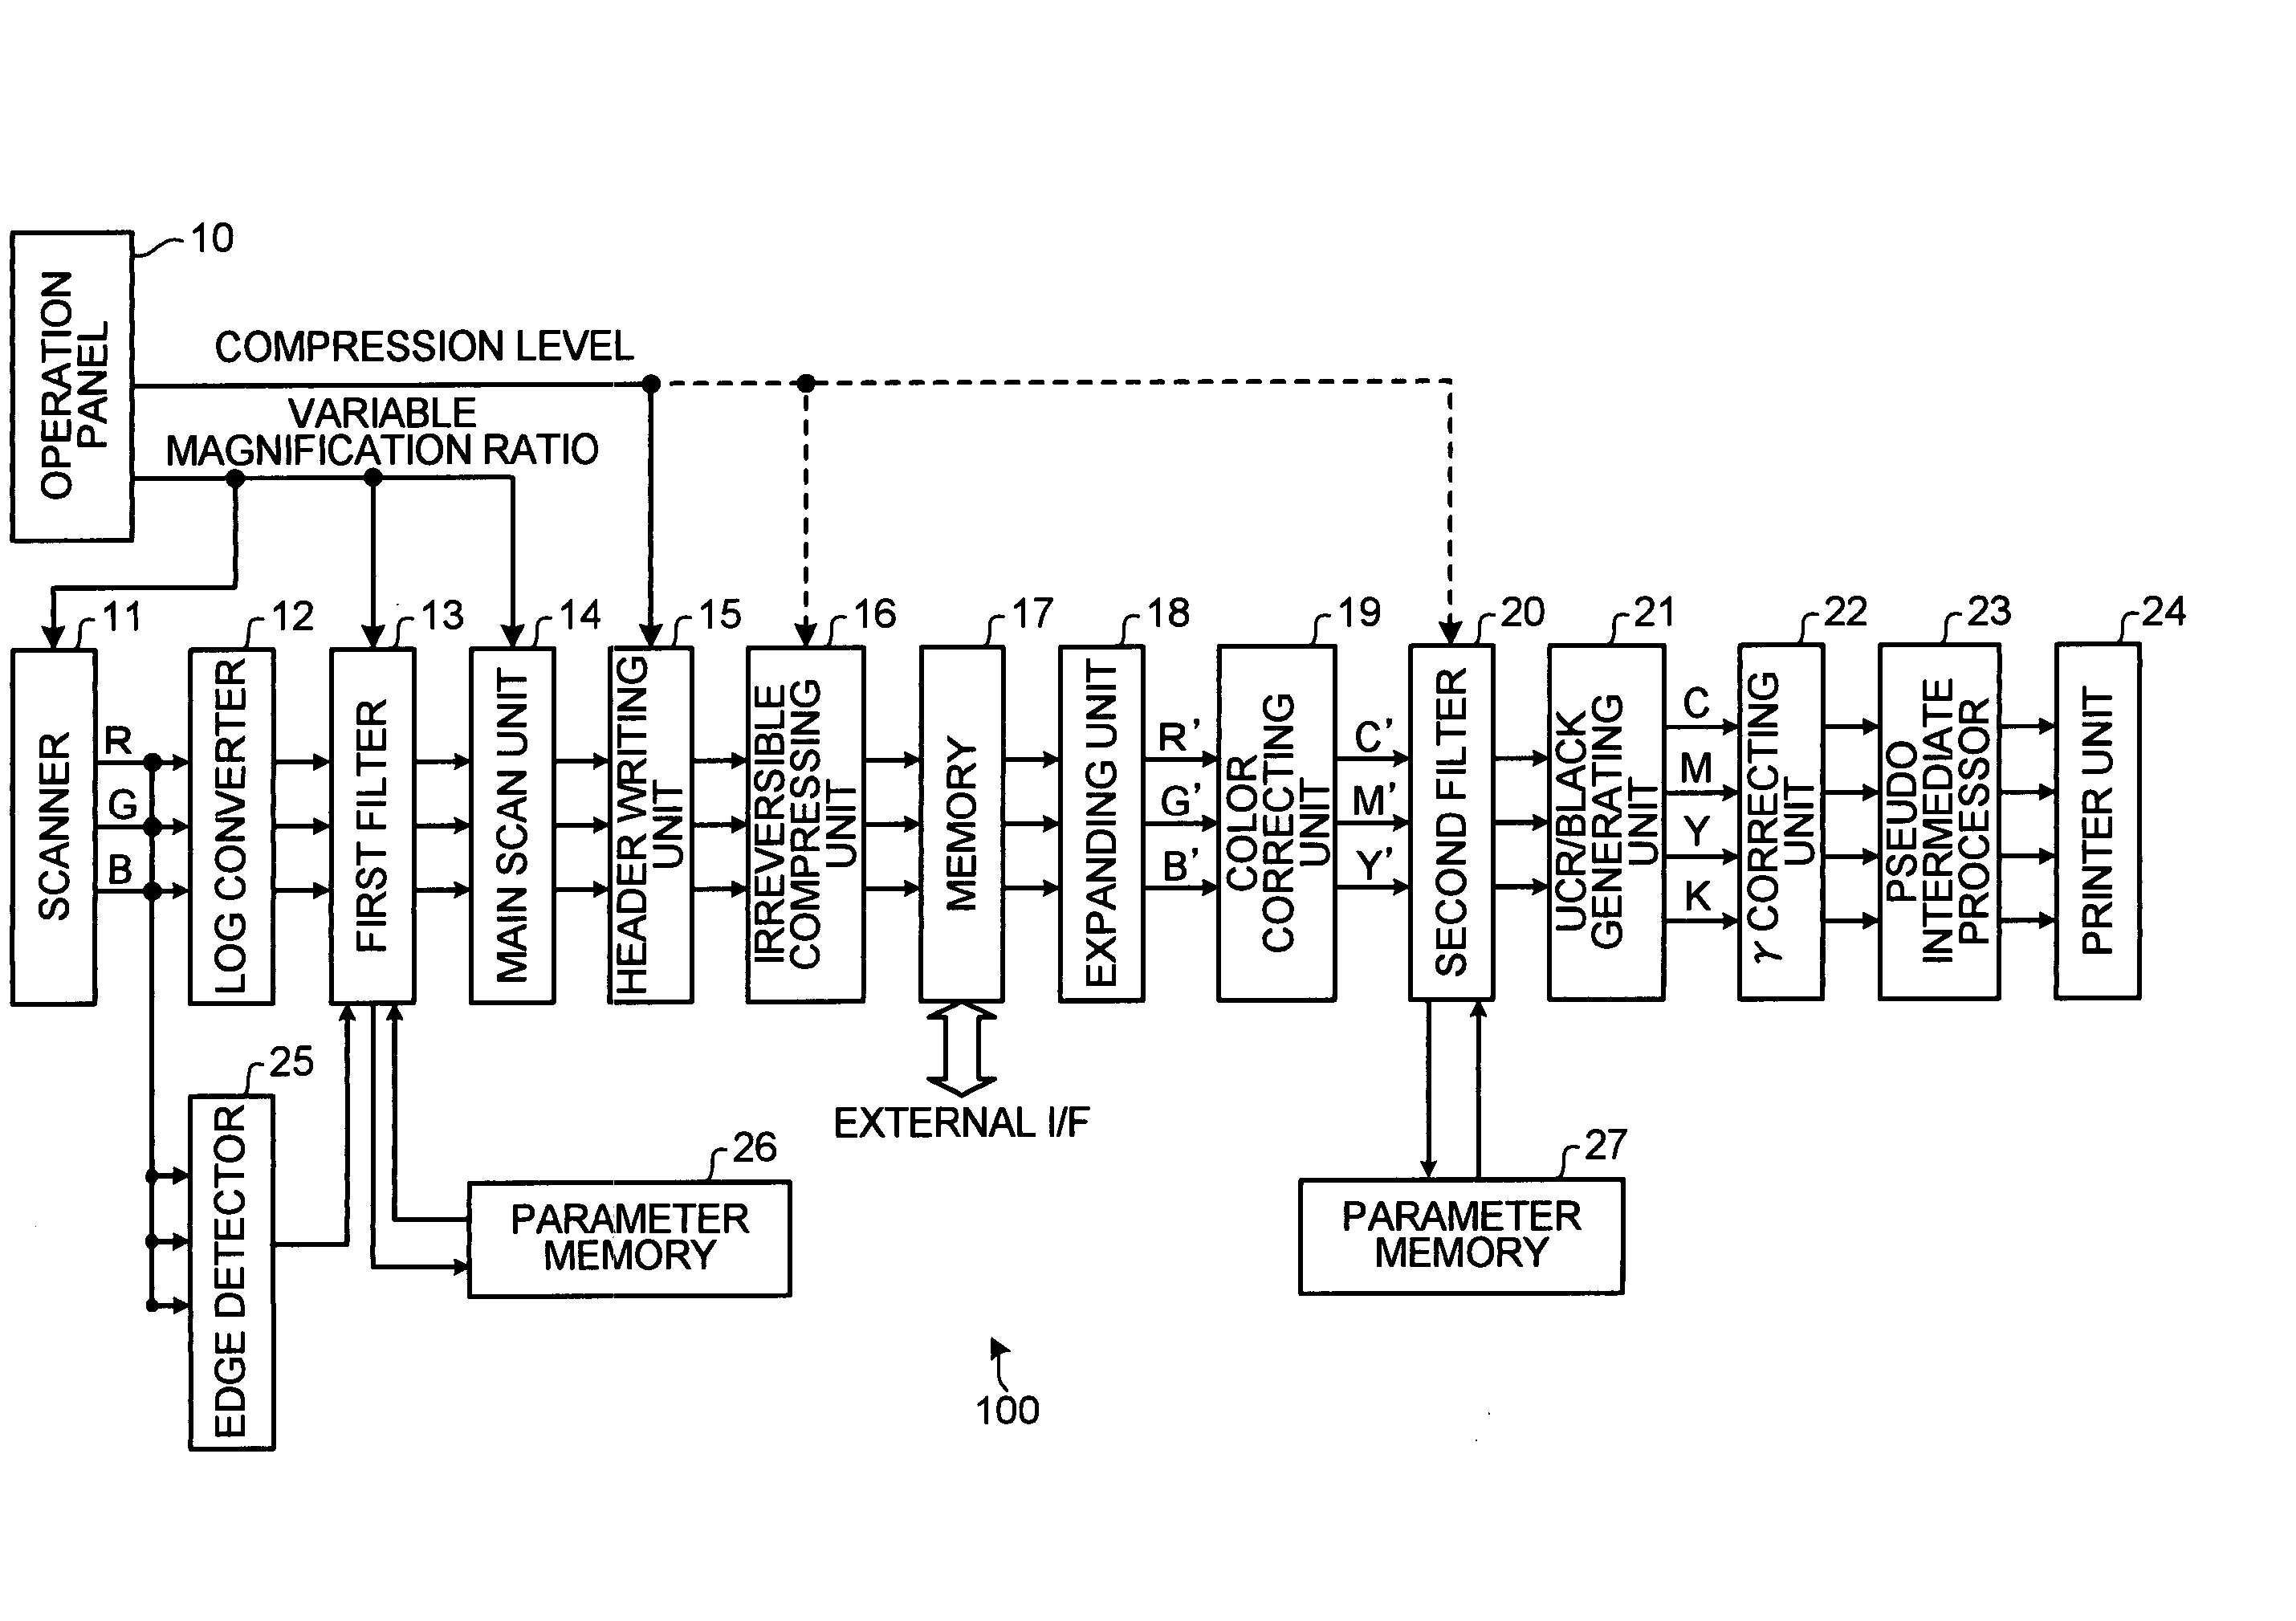 Image processing apparatus, image processing method, and computer product